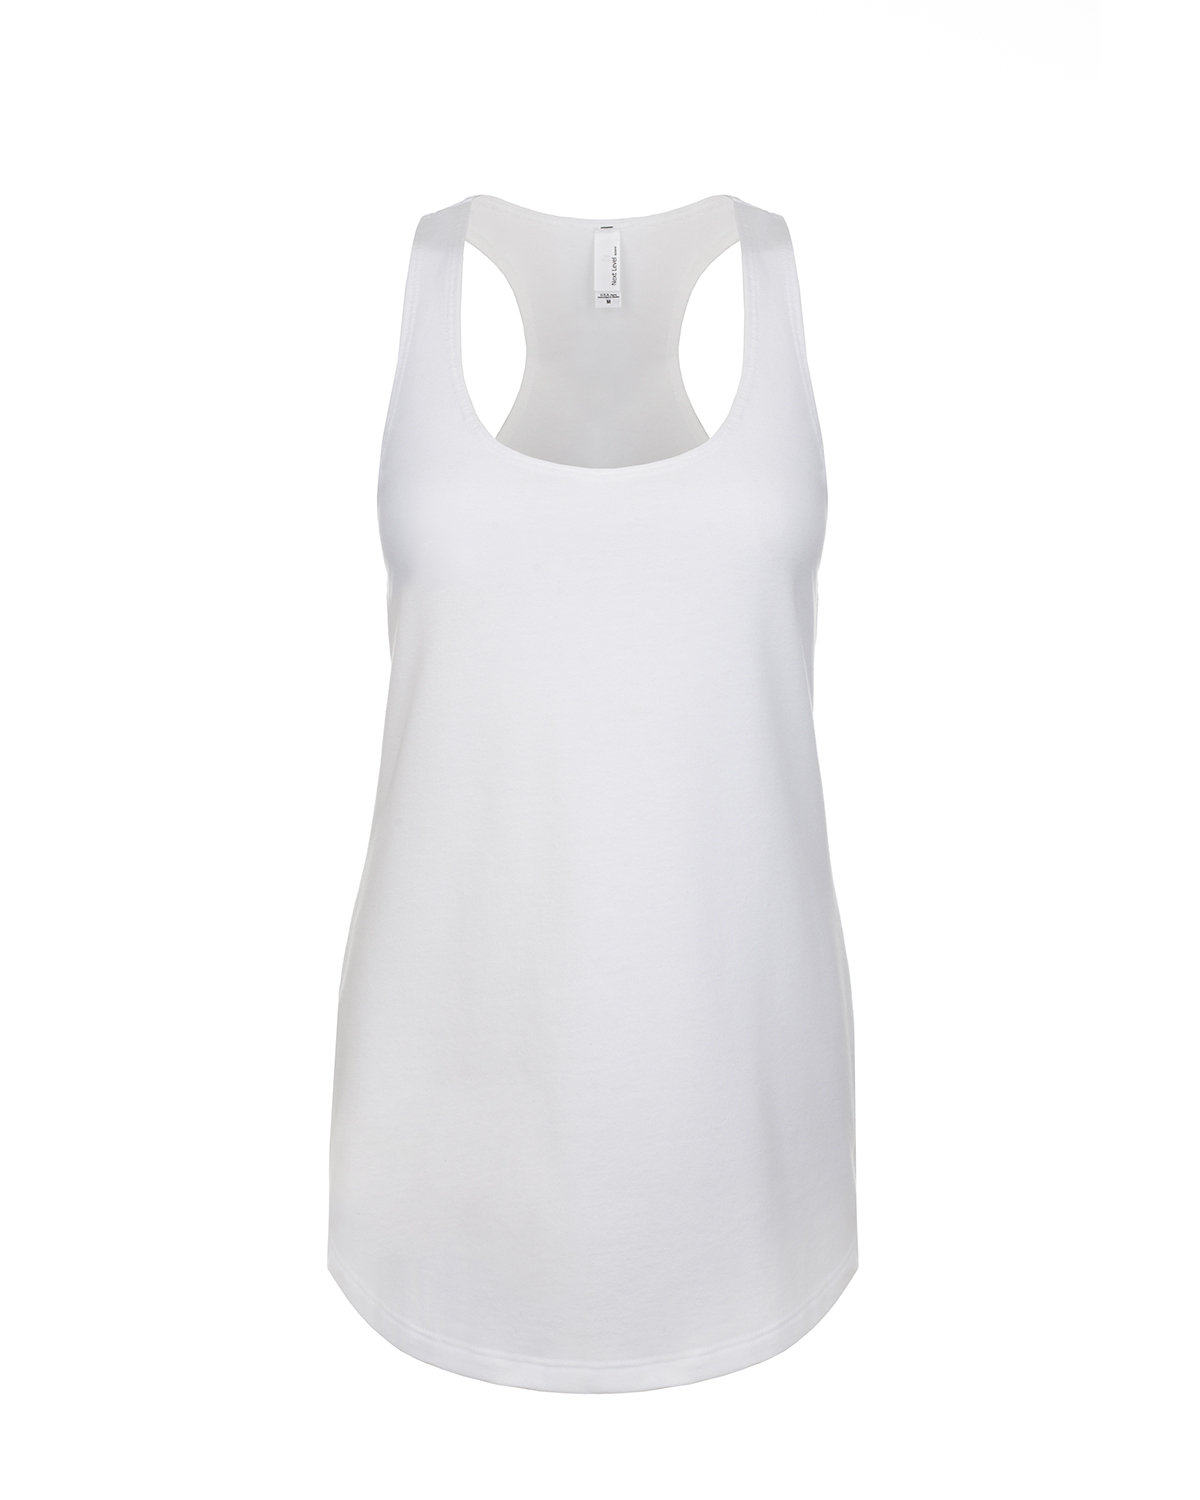 Next Level Apparel Ladies' French Terry Racerback Tank | alphabroder